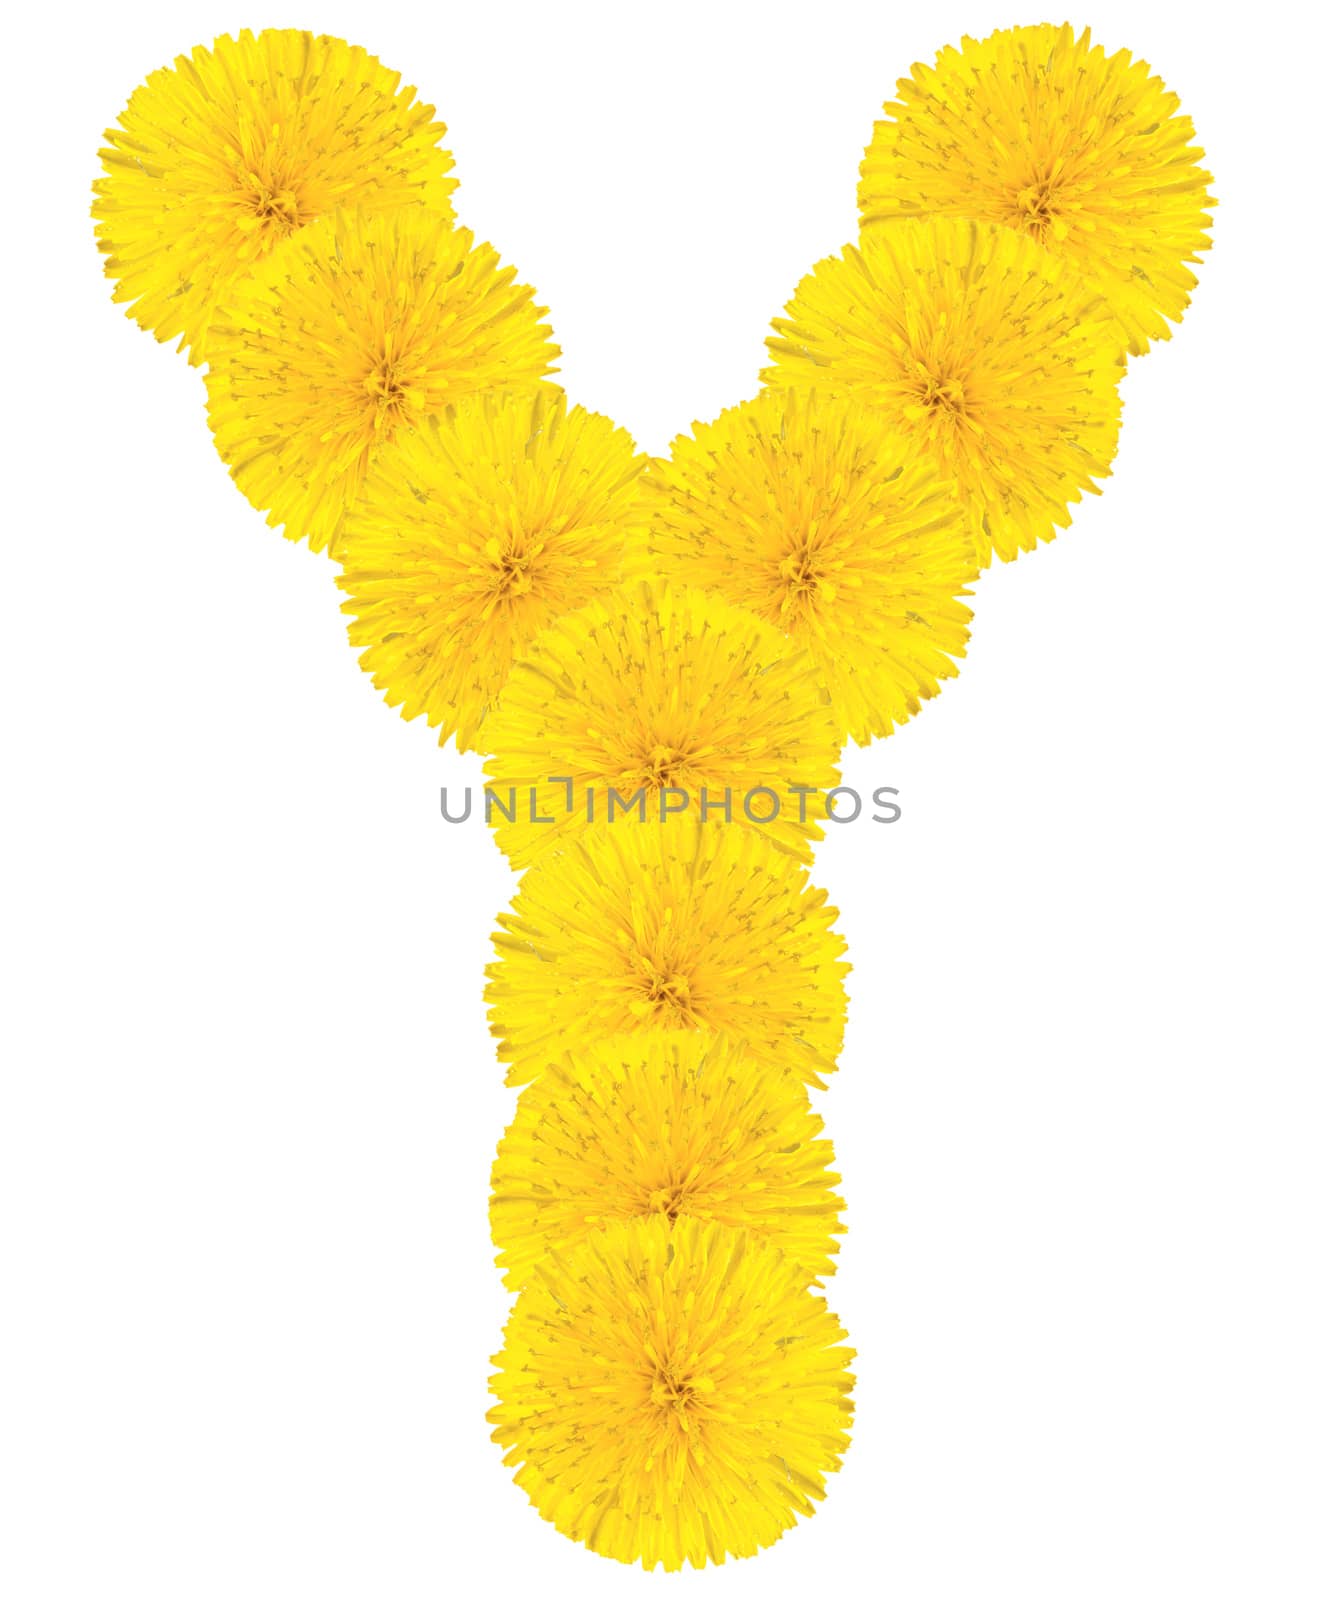 Letter Y made from dandelion flowers isolated on white background